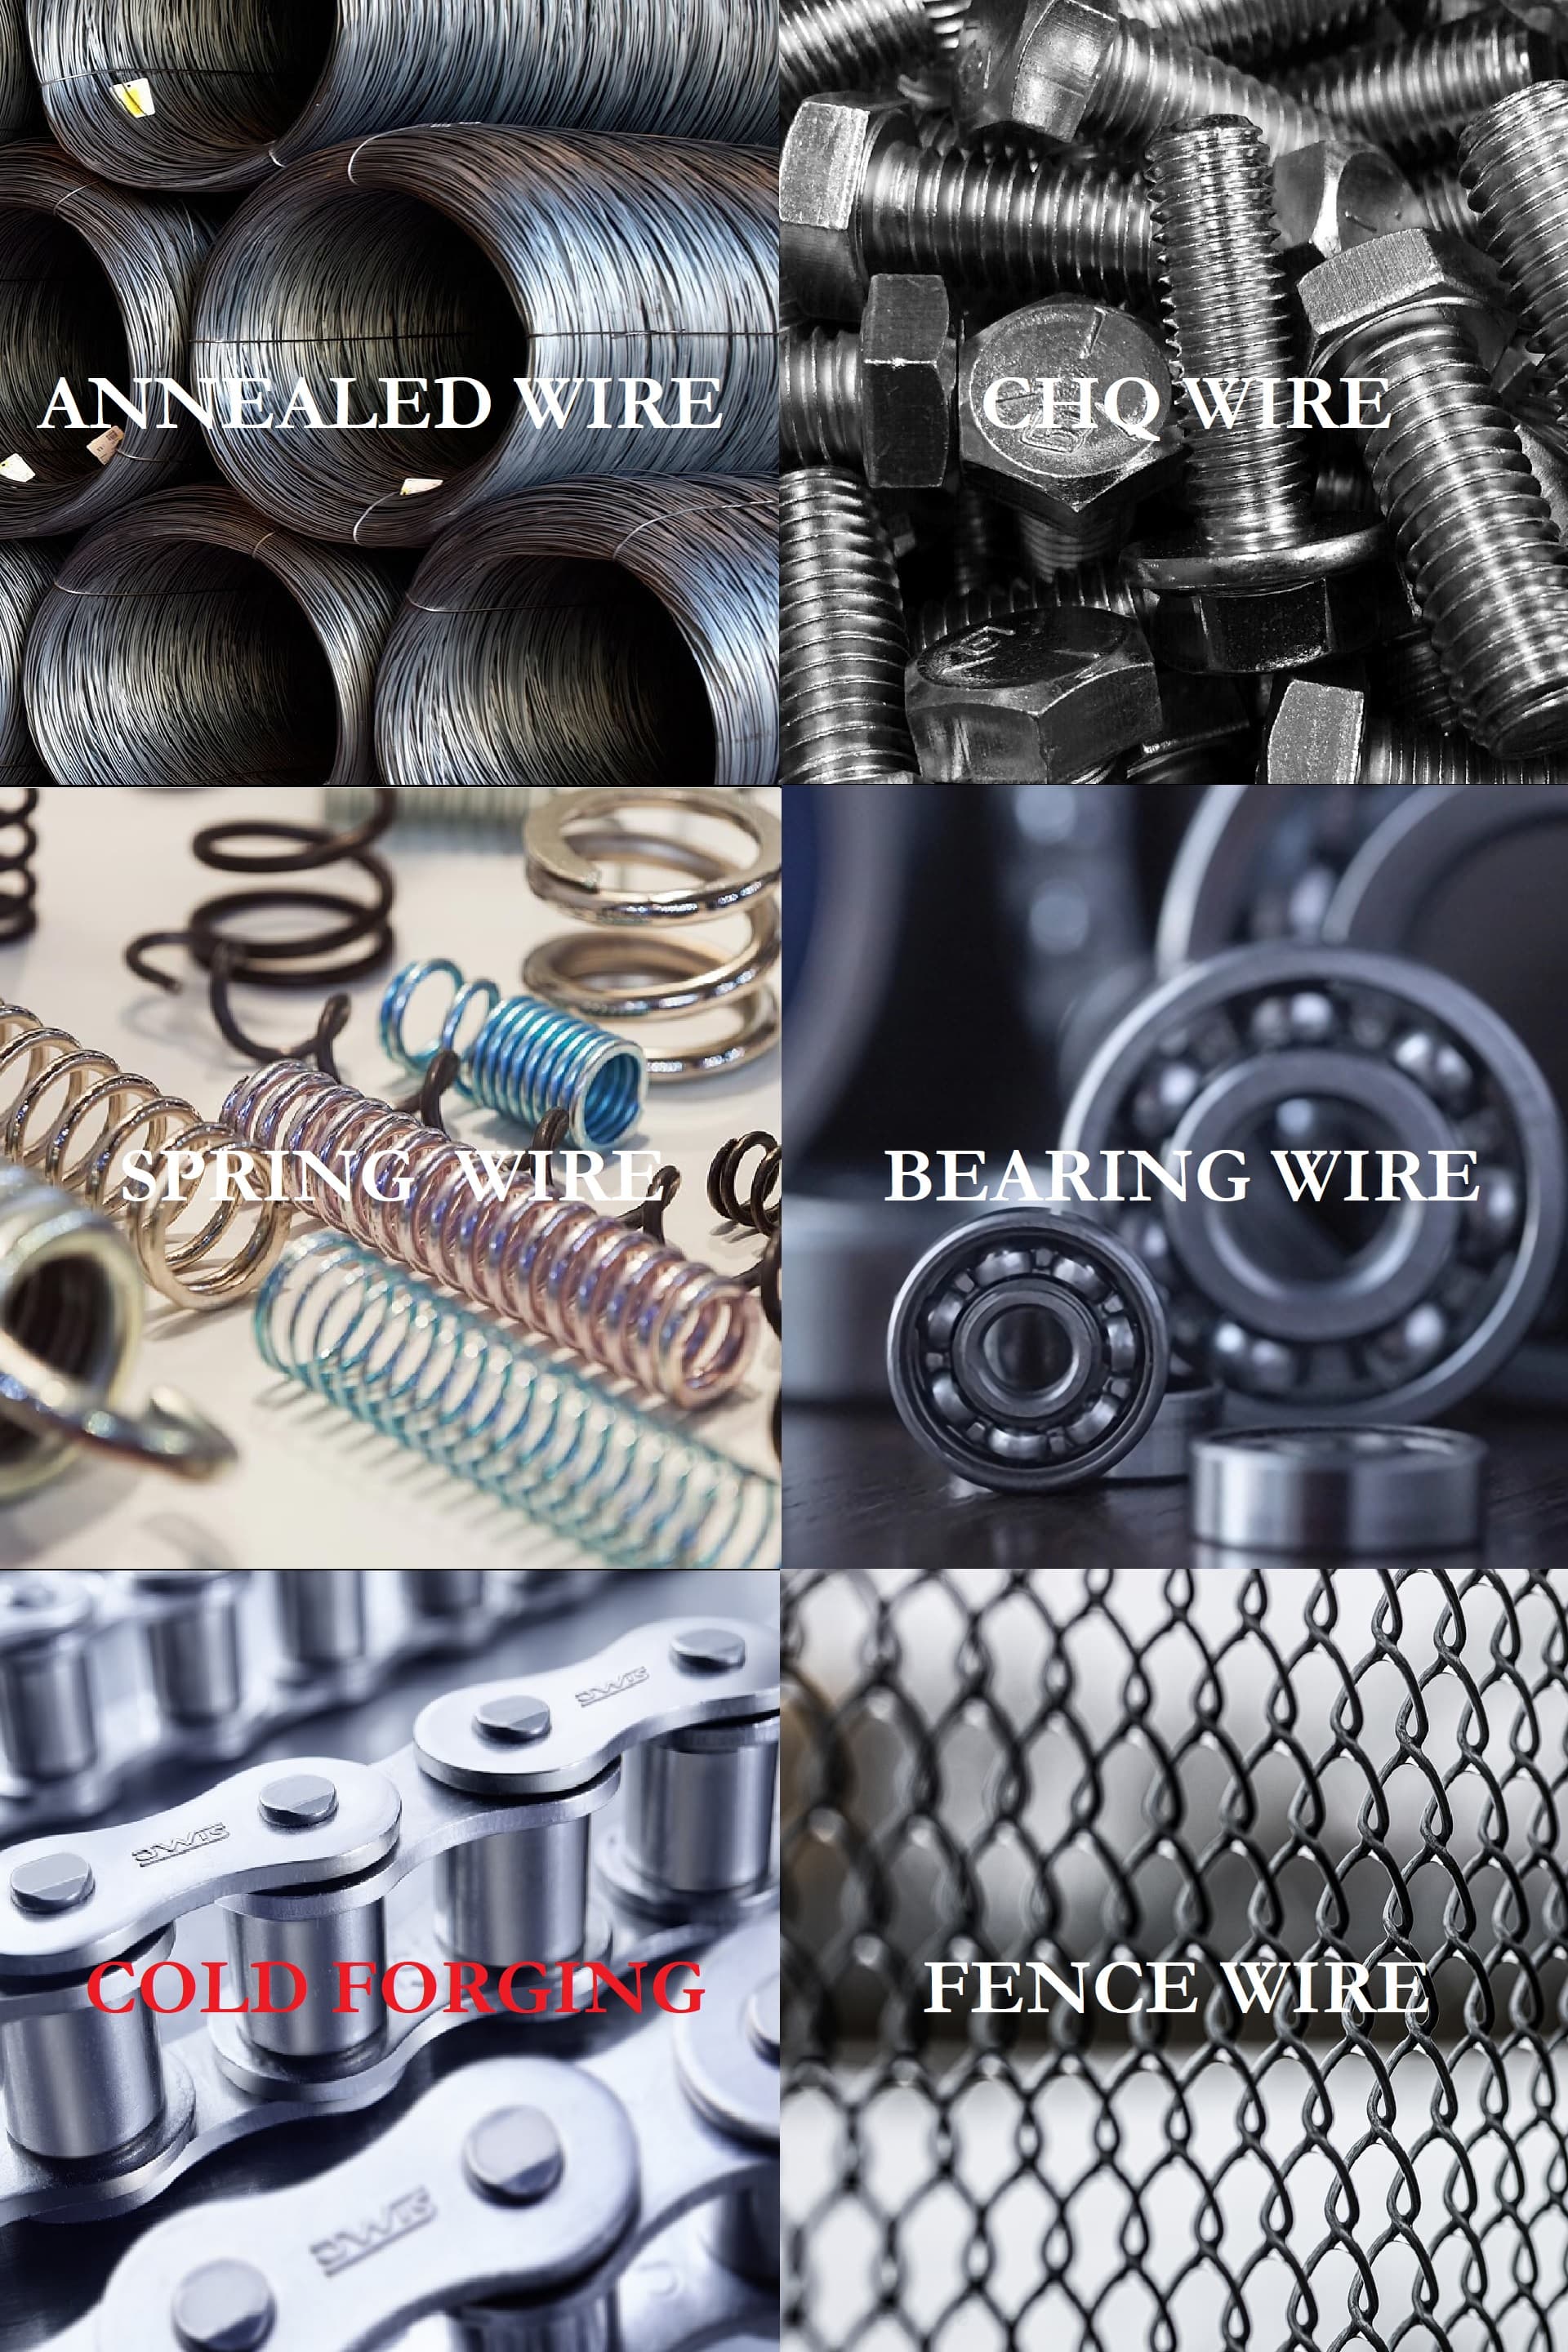 ONE OF THE BEST STEEL WIRE IN ASIA